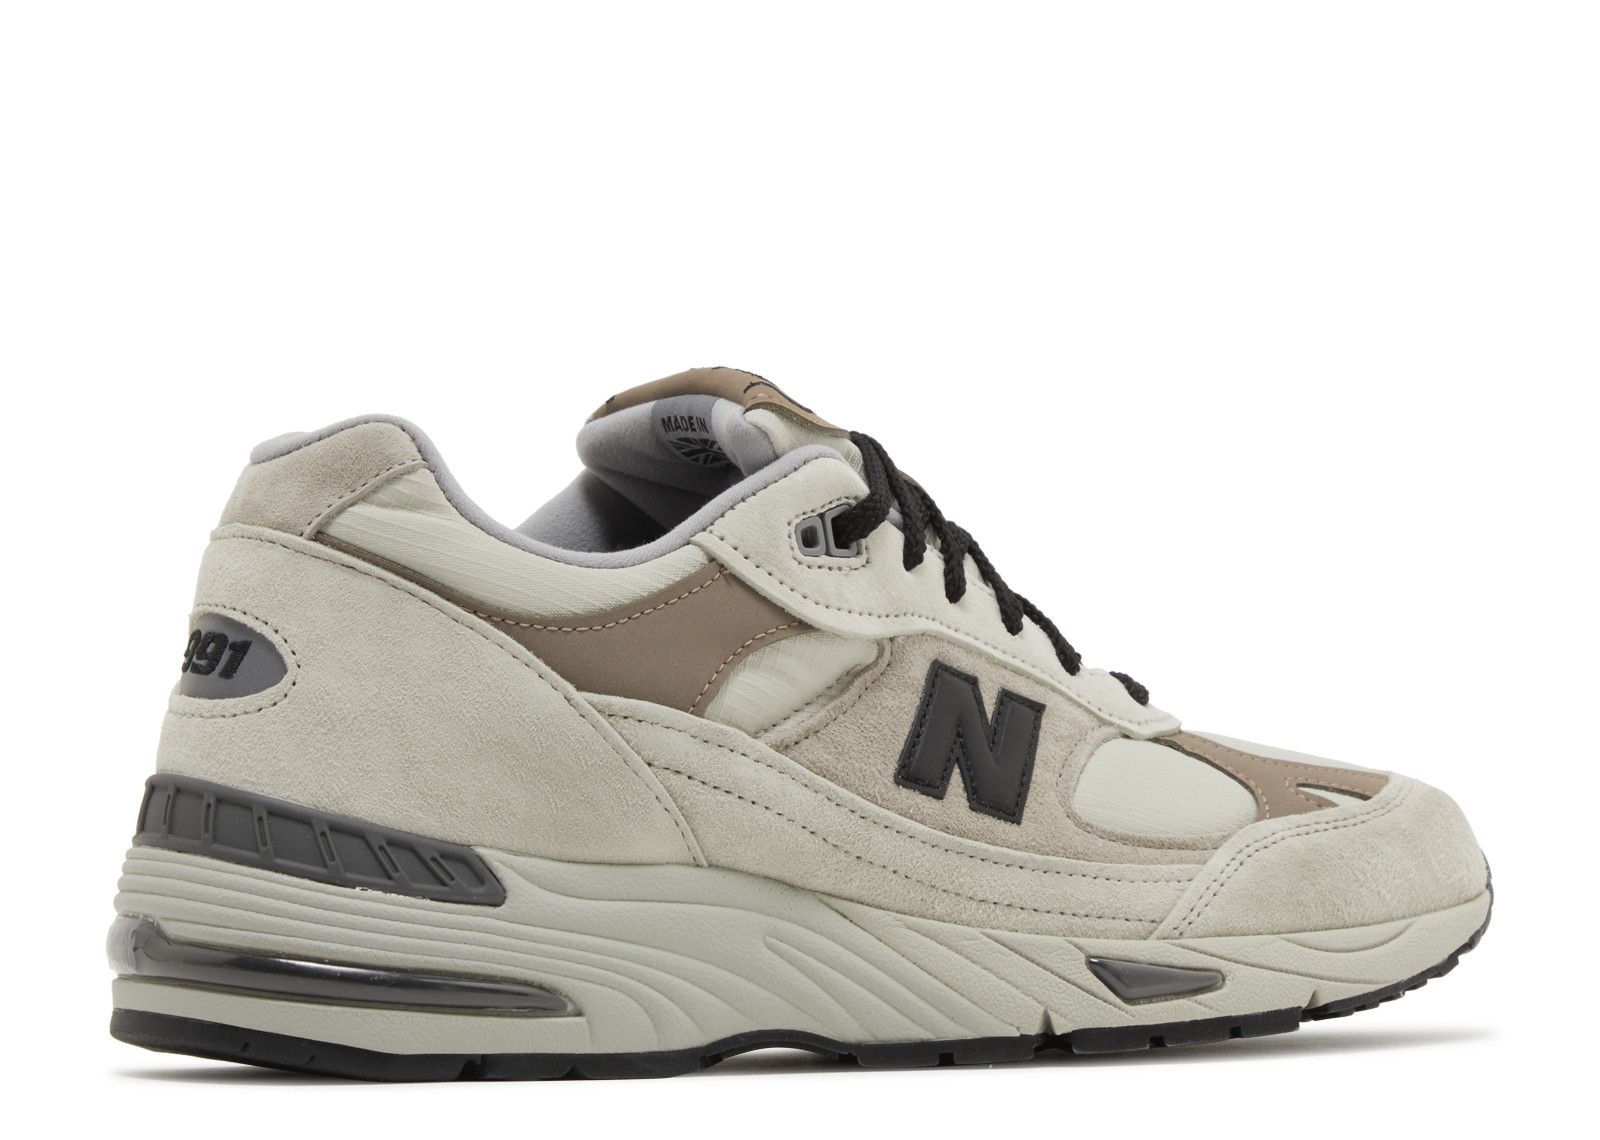 New Balance 991 Made in England 'Urban Winter Pack - Pelican'